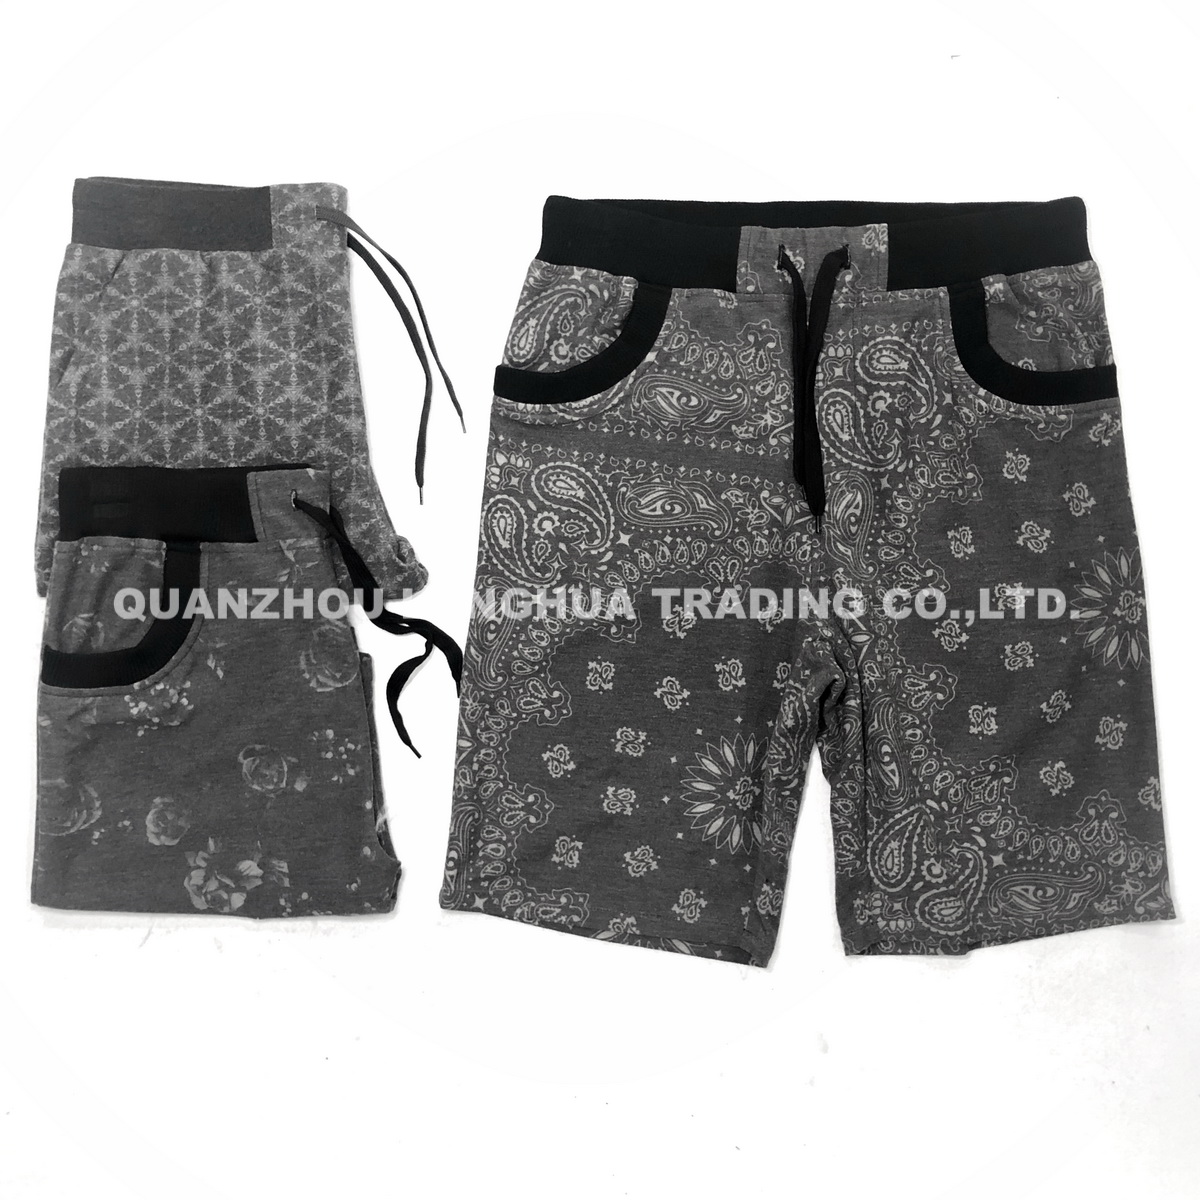 Men and Boys Shorts With Printing Grey Apparel Jeans Trousers Kids Wear Pants Casual Knitwear T/C Terry